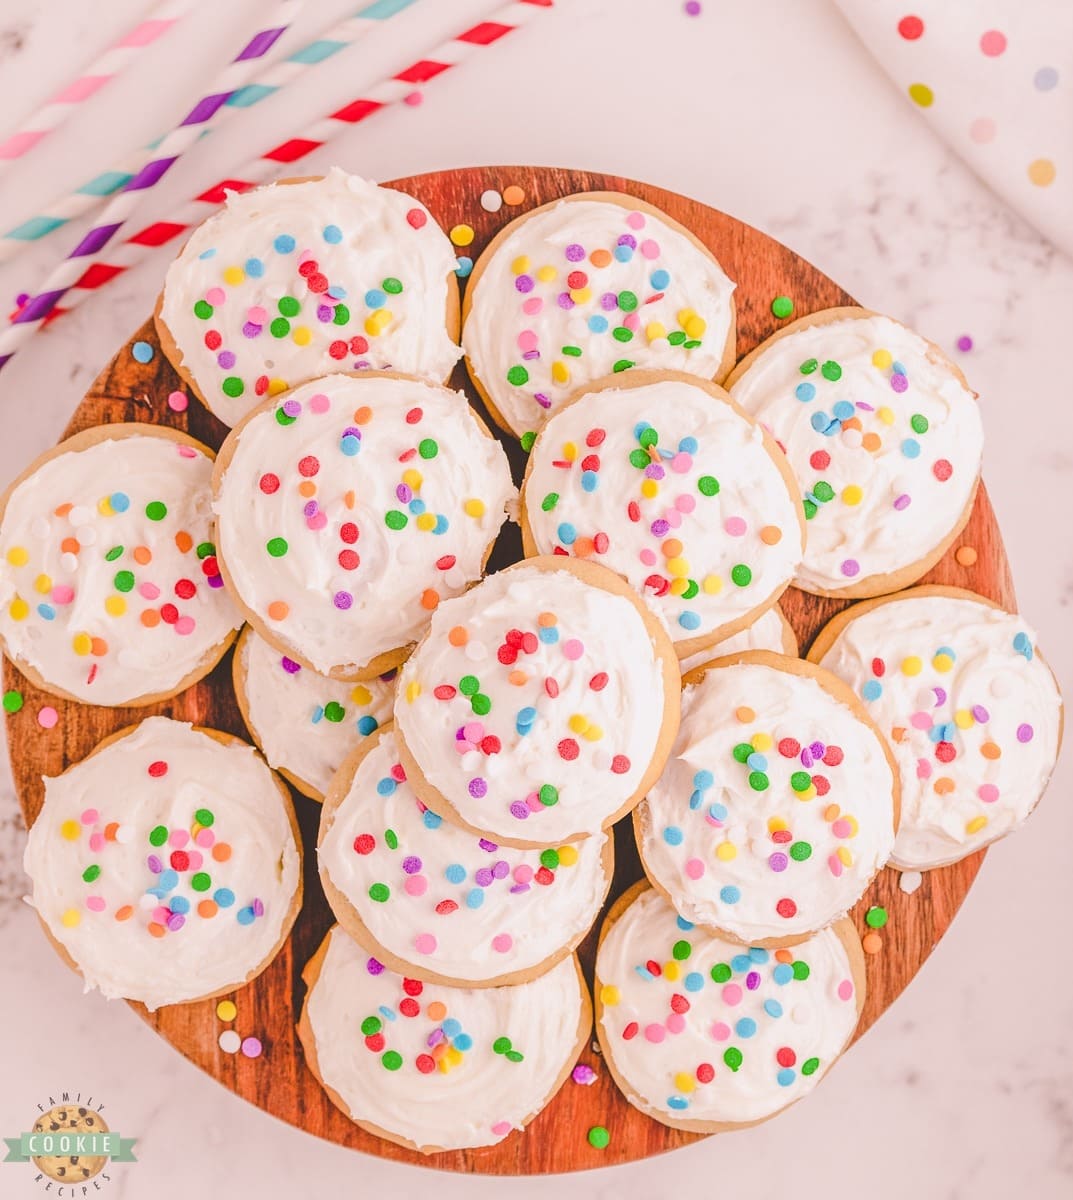 Bunch of cookies with vanilla frosting and colorful sprinkles on top served on a wooden board